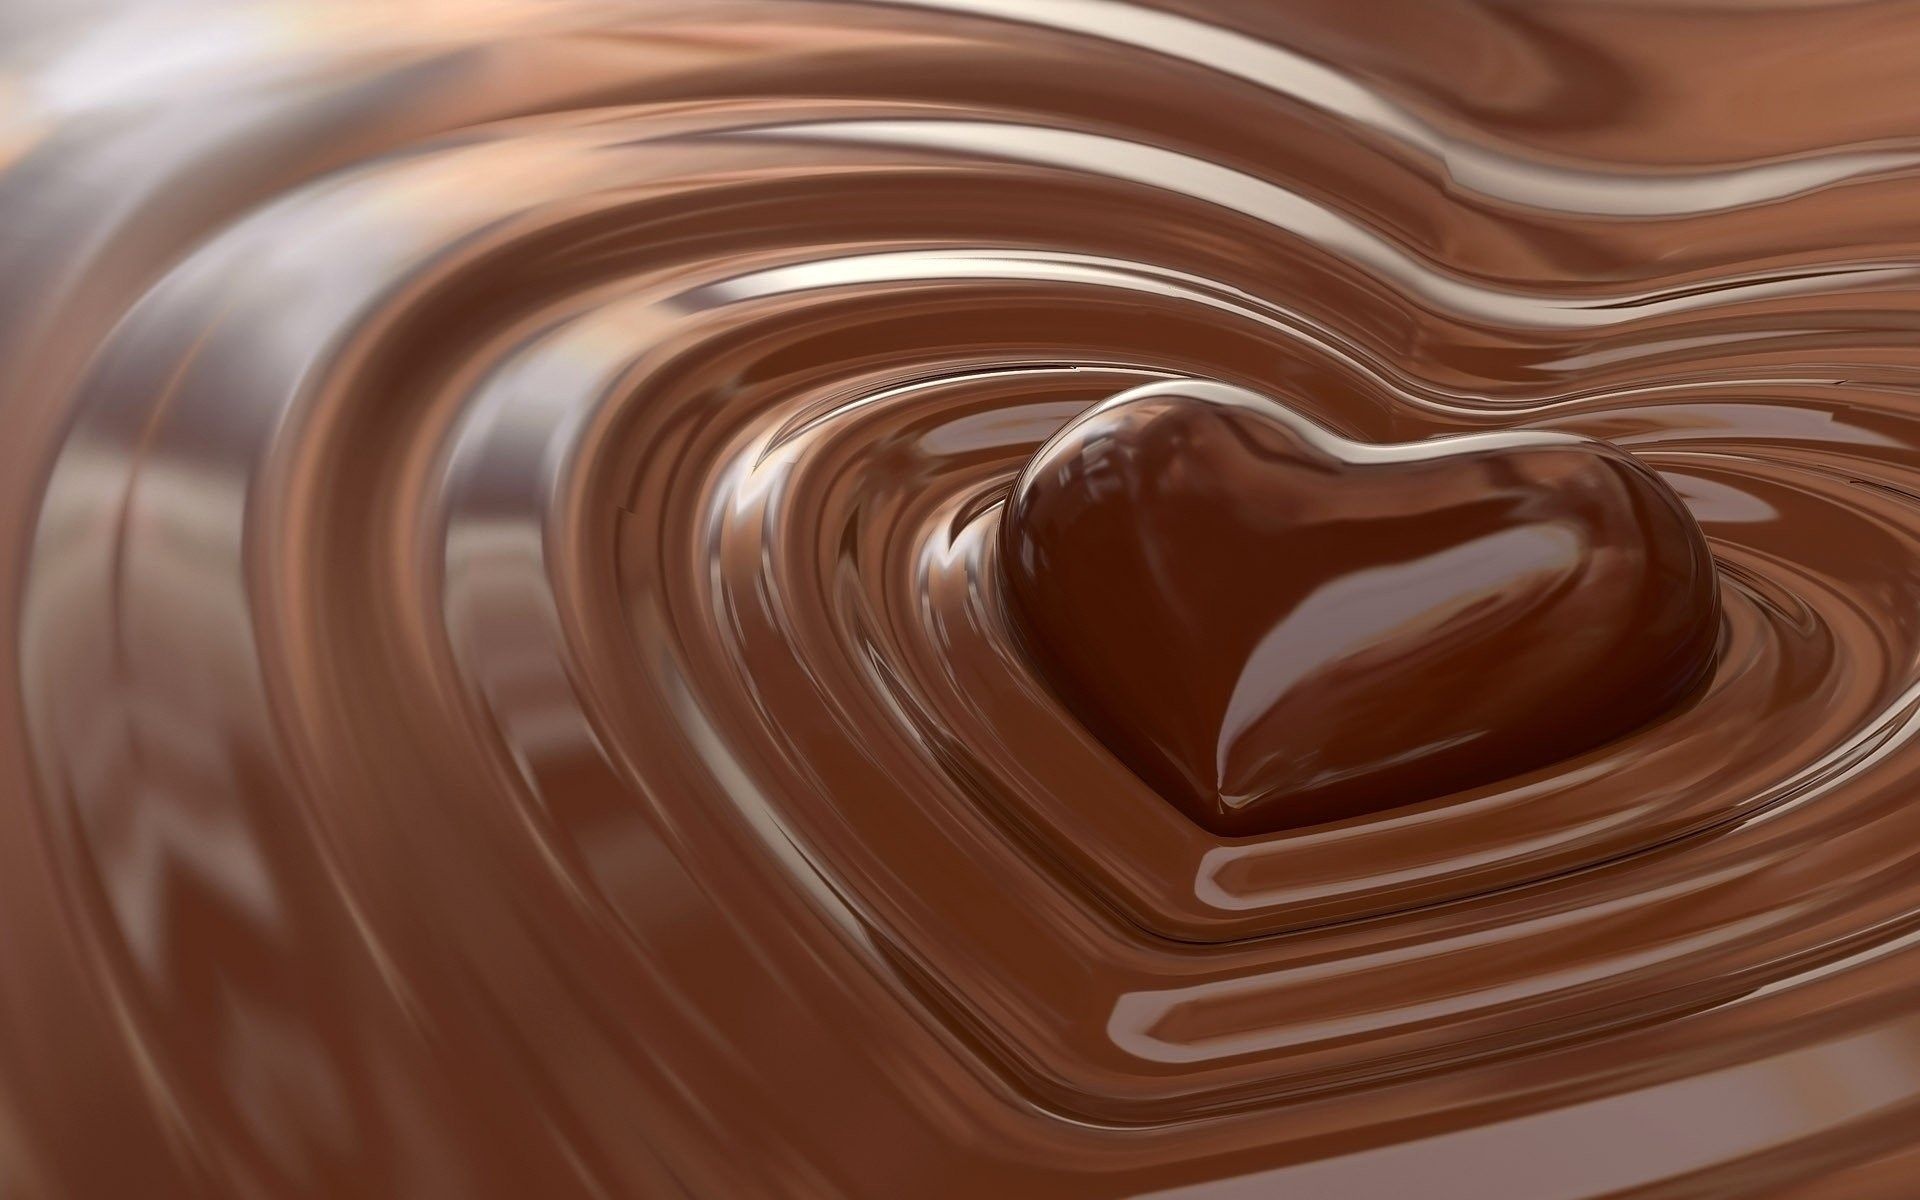 Chocolate wallpapers, Stunning designs, Delicious shades, Luxurious indulgence, 1920x1200 HD Desktop